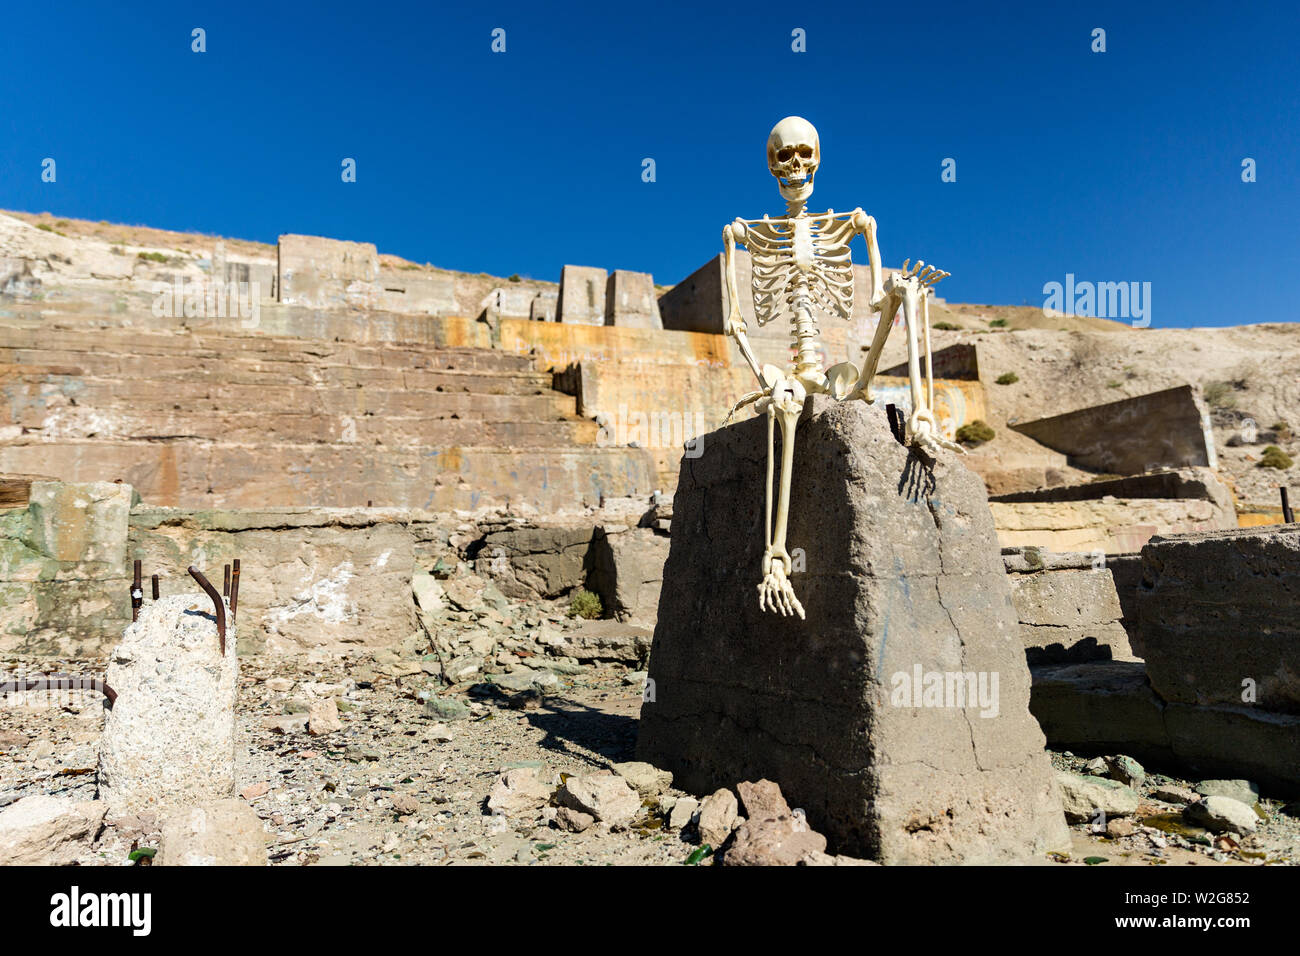 Skeleton posing in mining ruins in the desert on a hot day Stock Photo